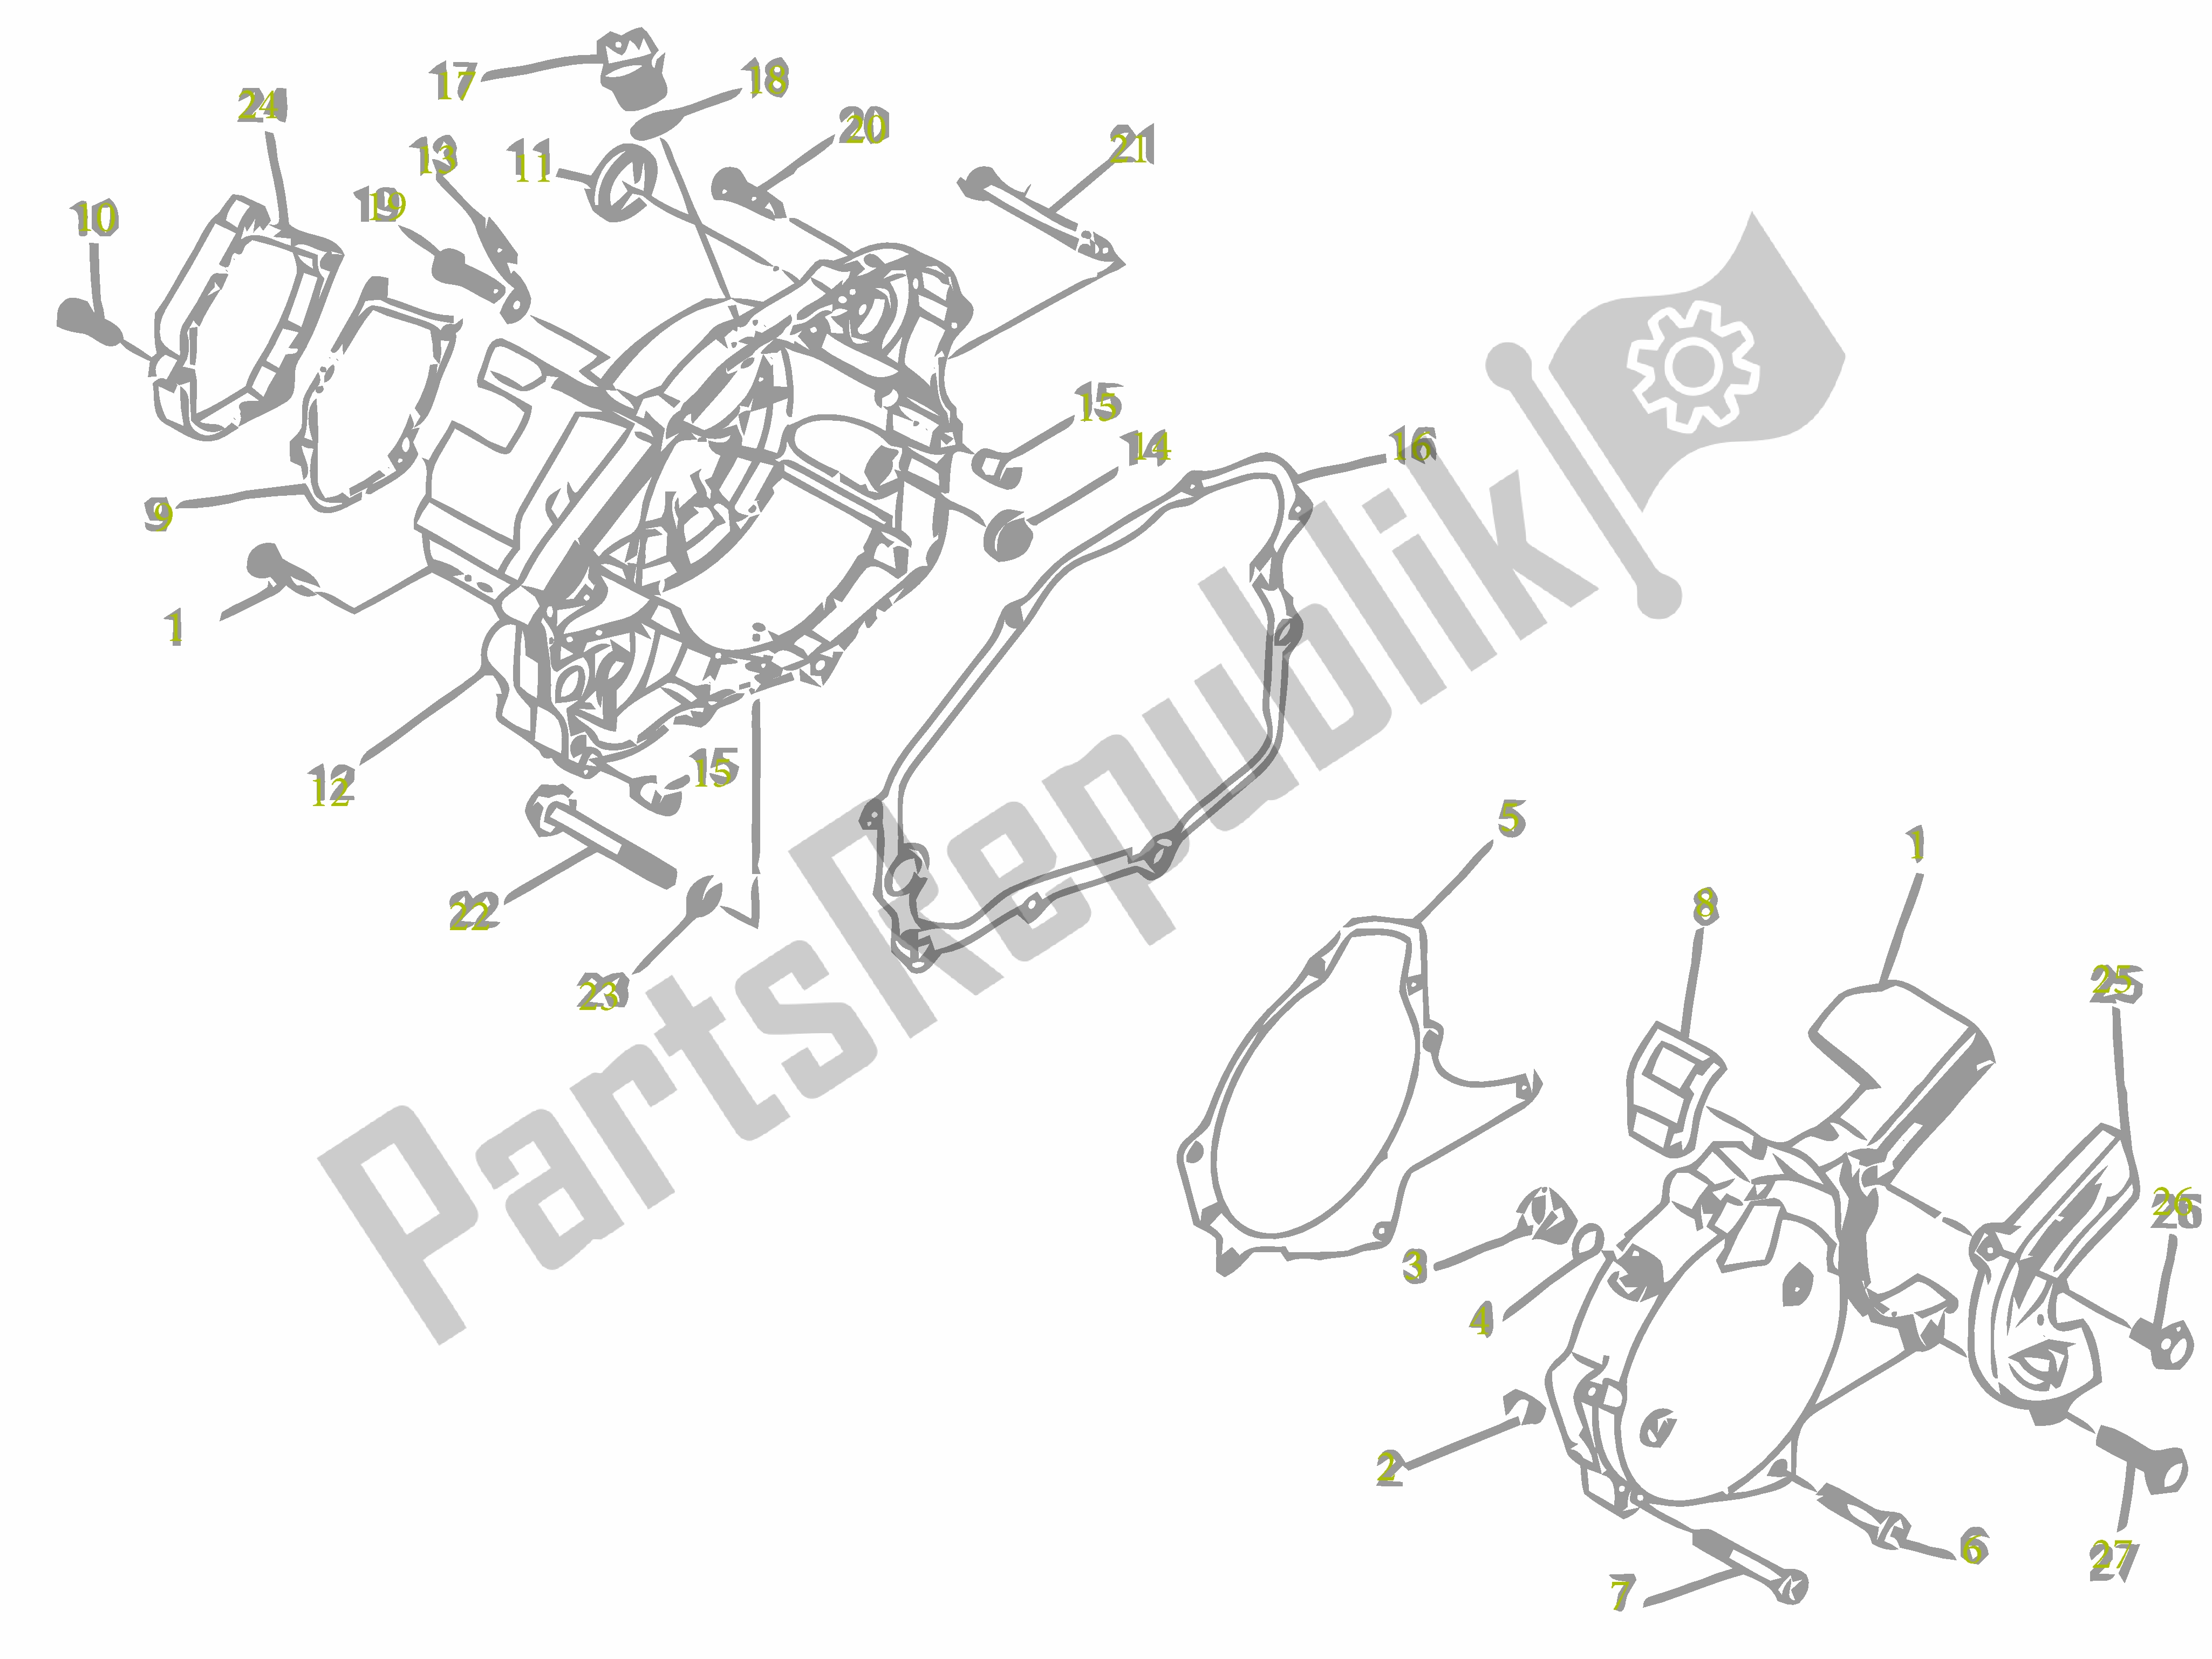 All parts for the Behuizingsdeksel of the Gilera SC 125 2007 - 2015